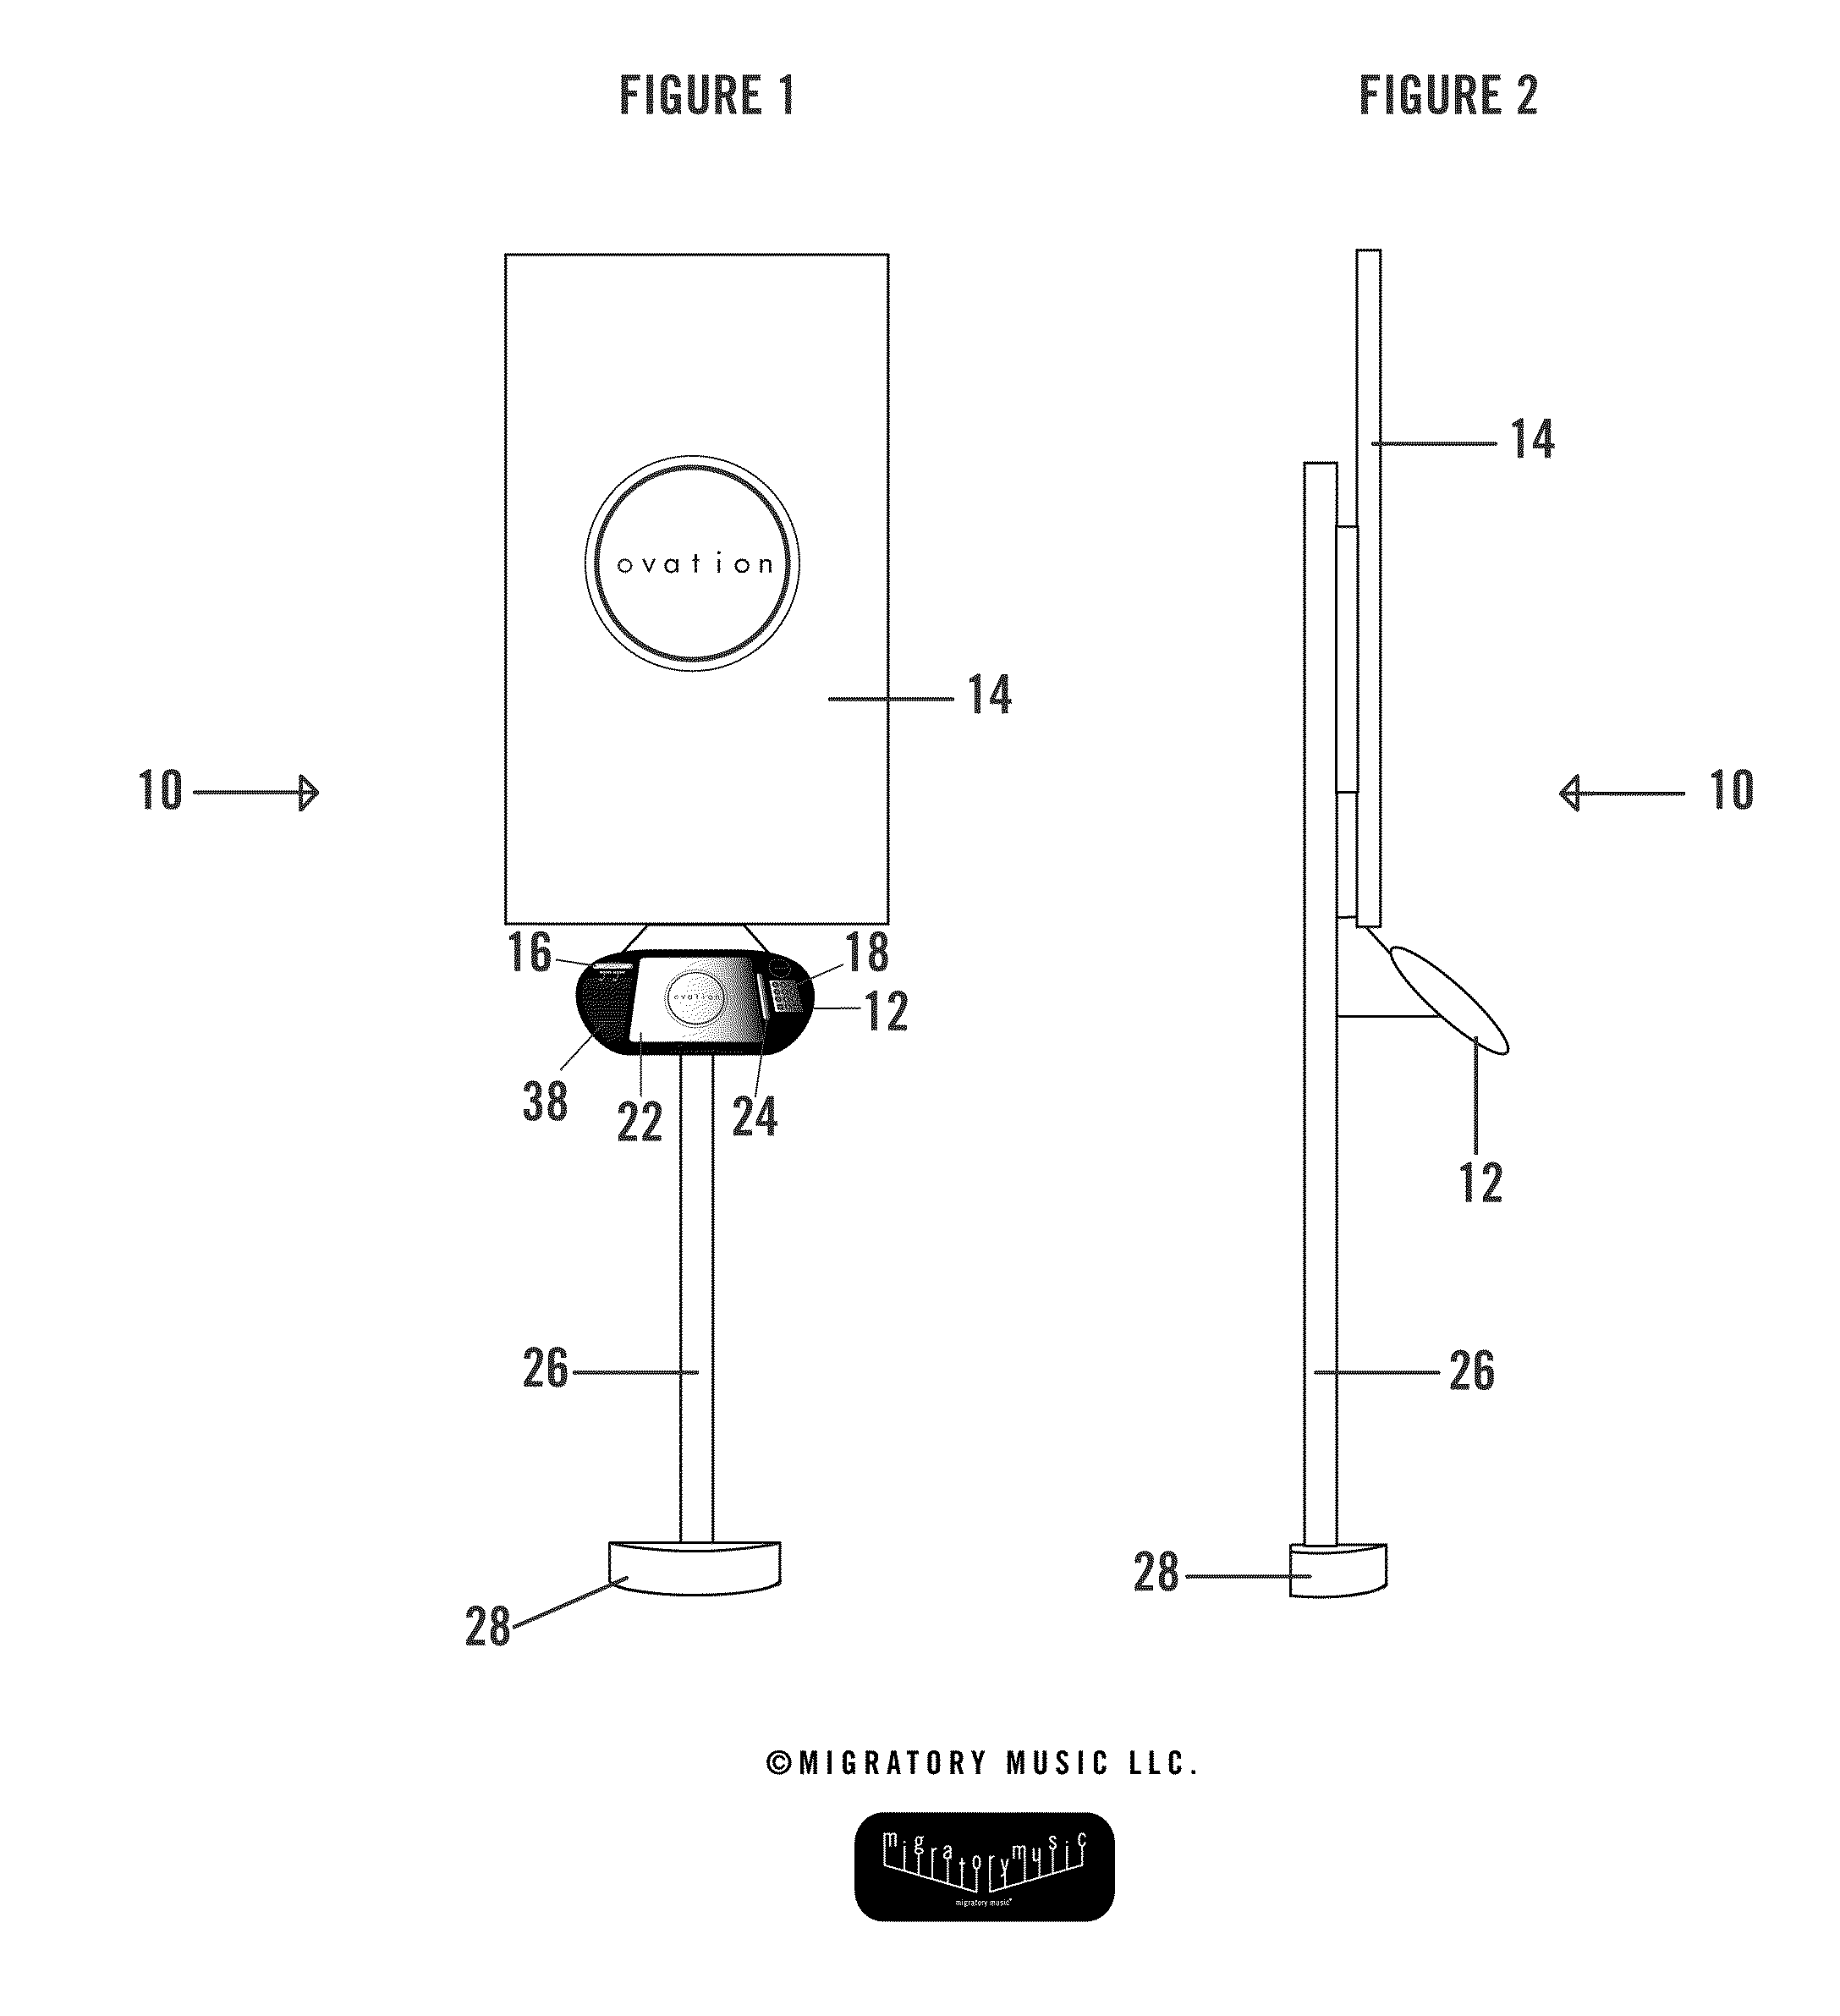 System and method for live music performance digital recording, distribution, and digital advertising